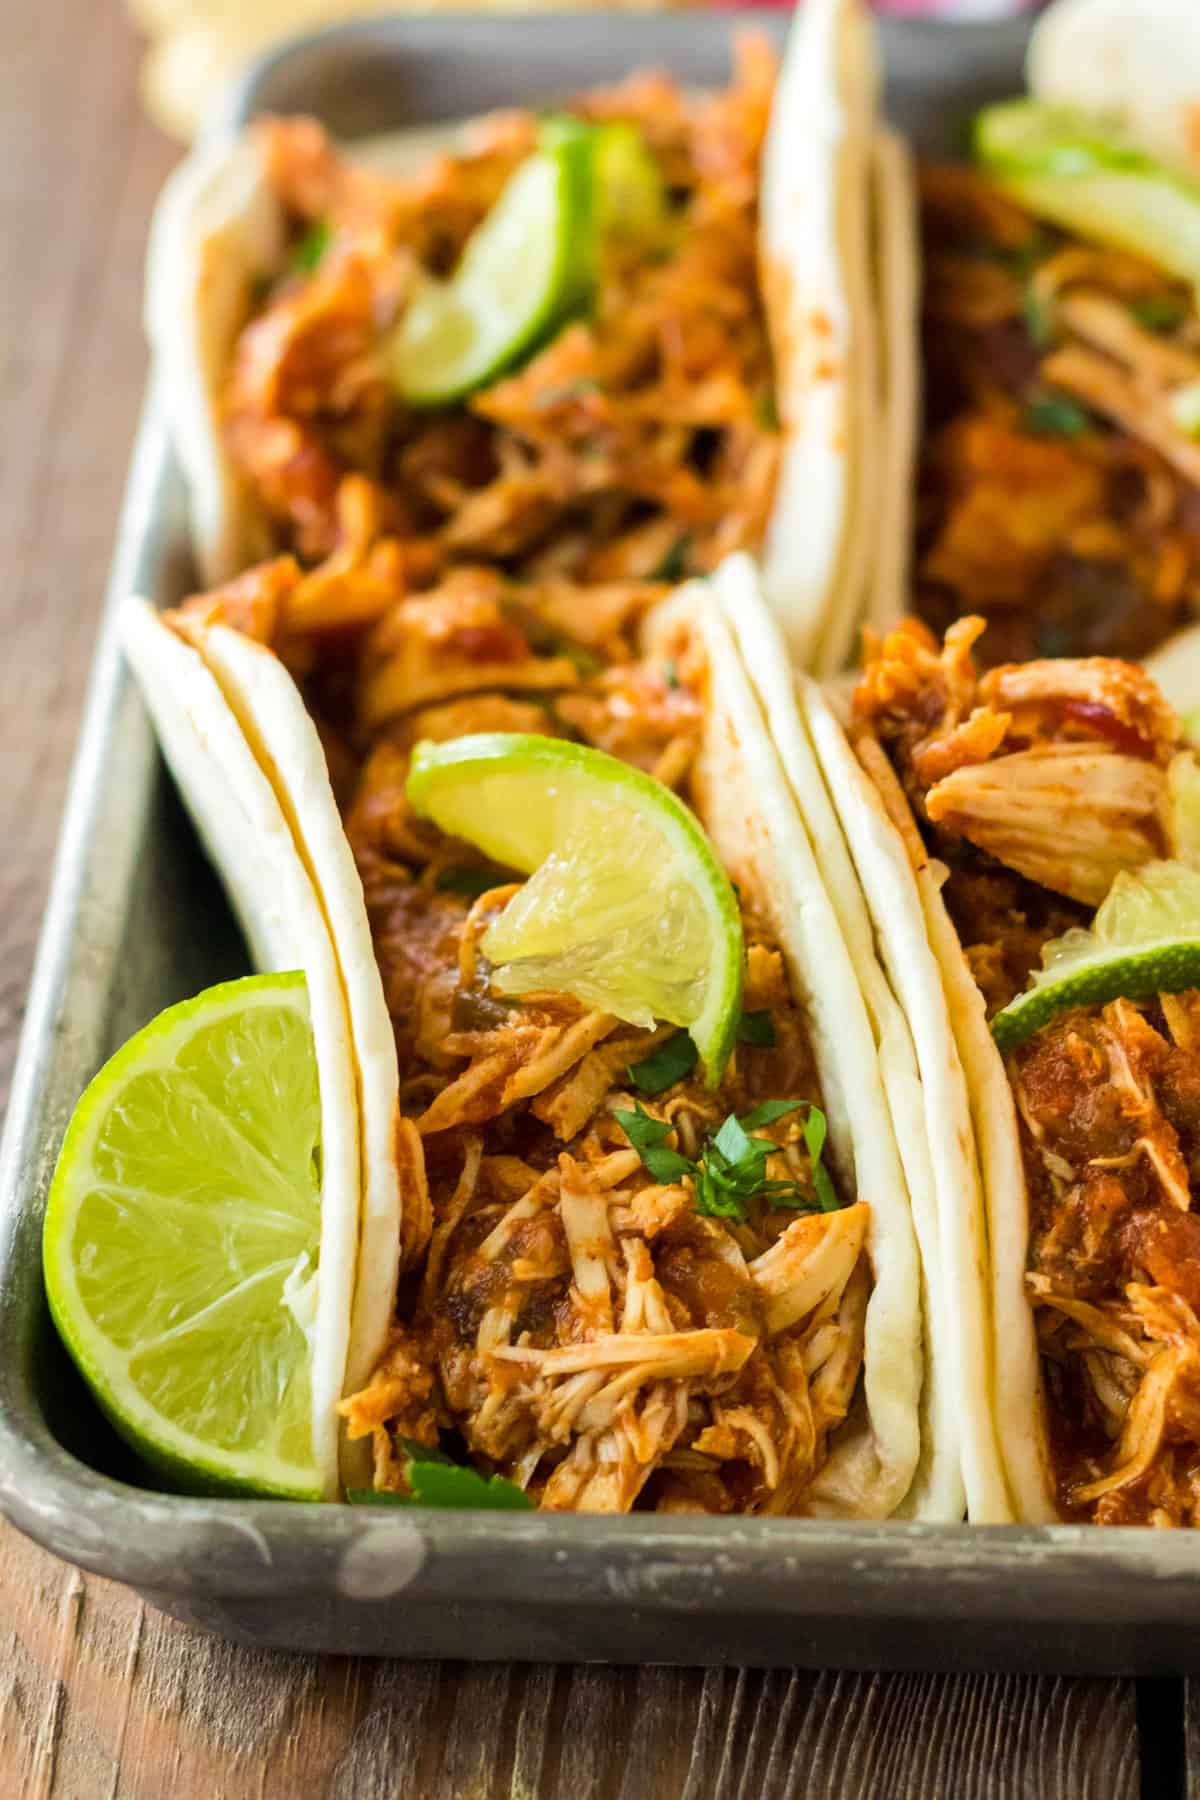 Slow cooker shredded chicken tacos with salsa and taco seasoning.